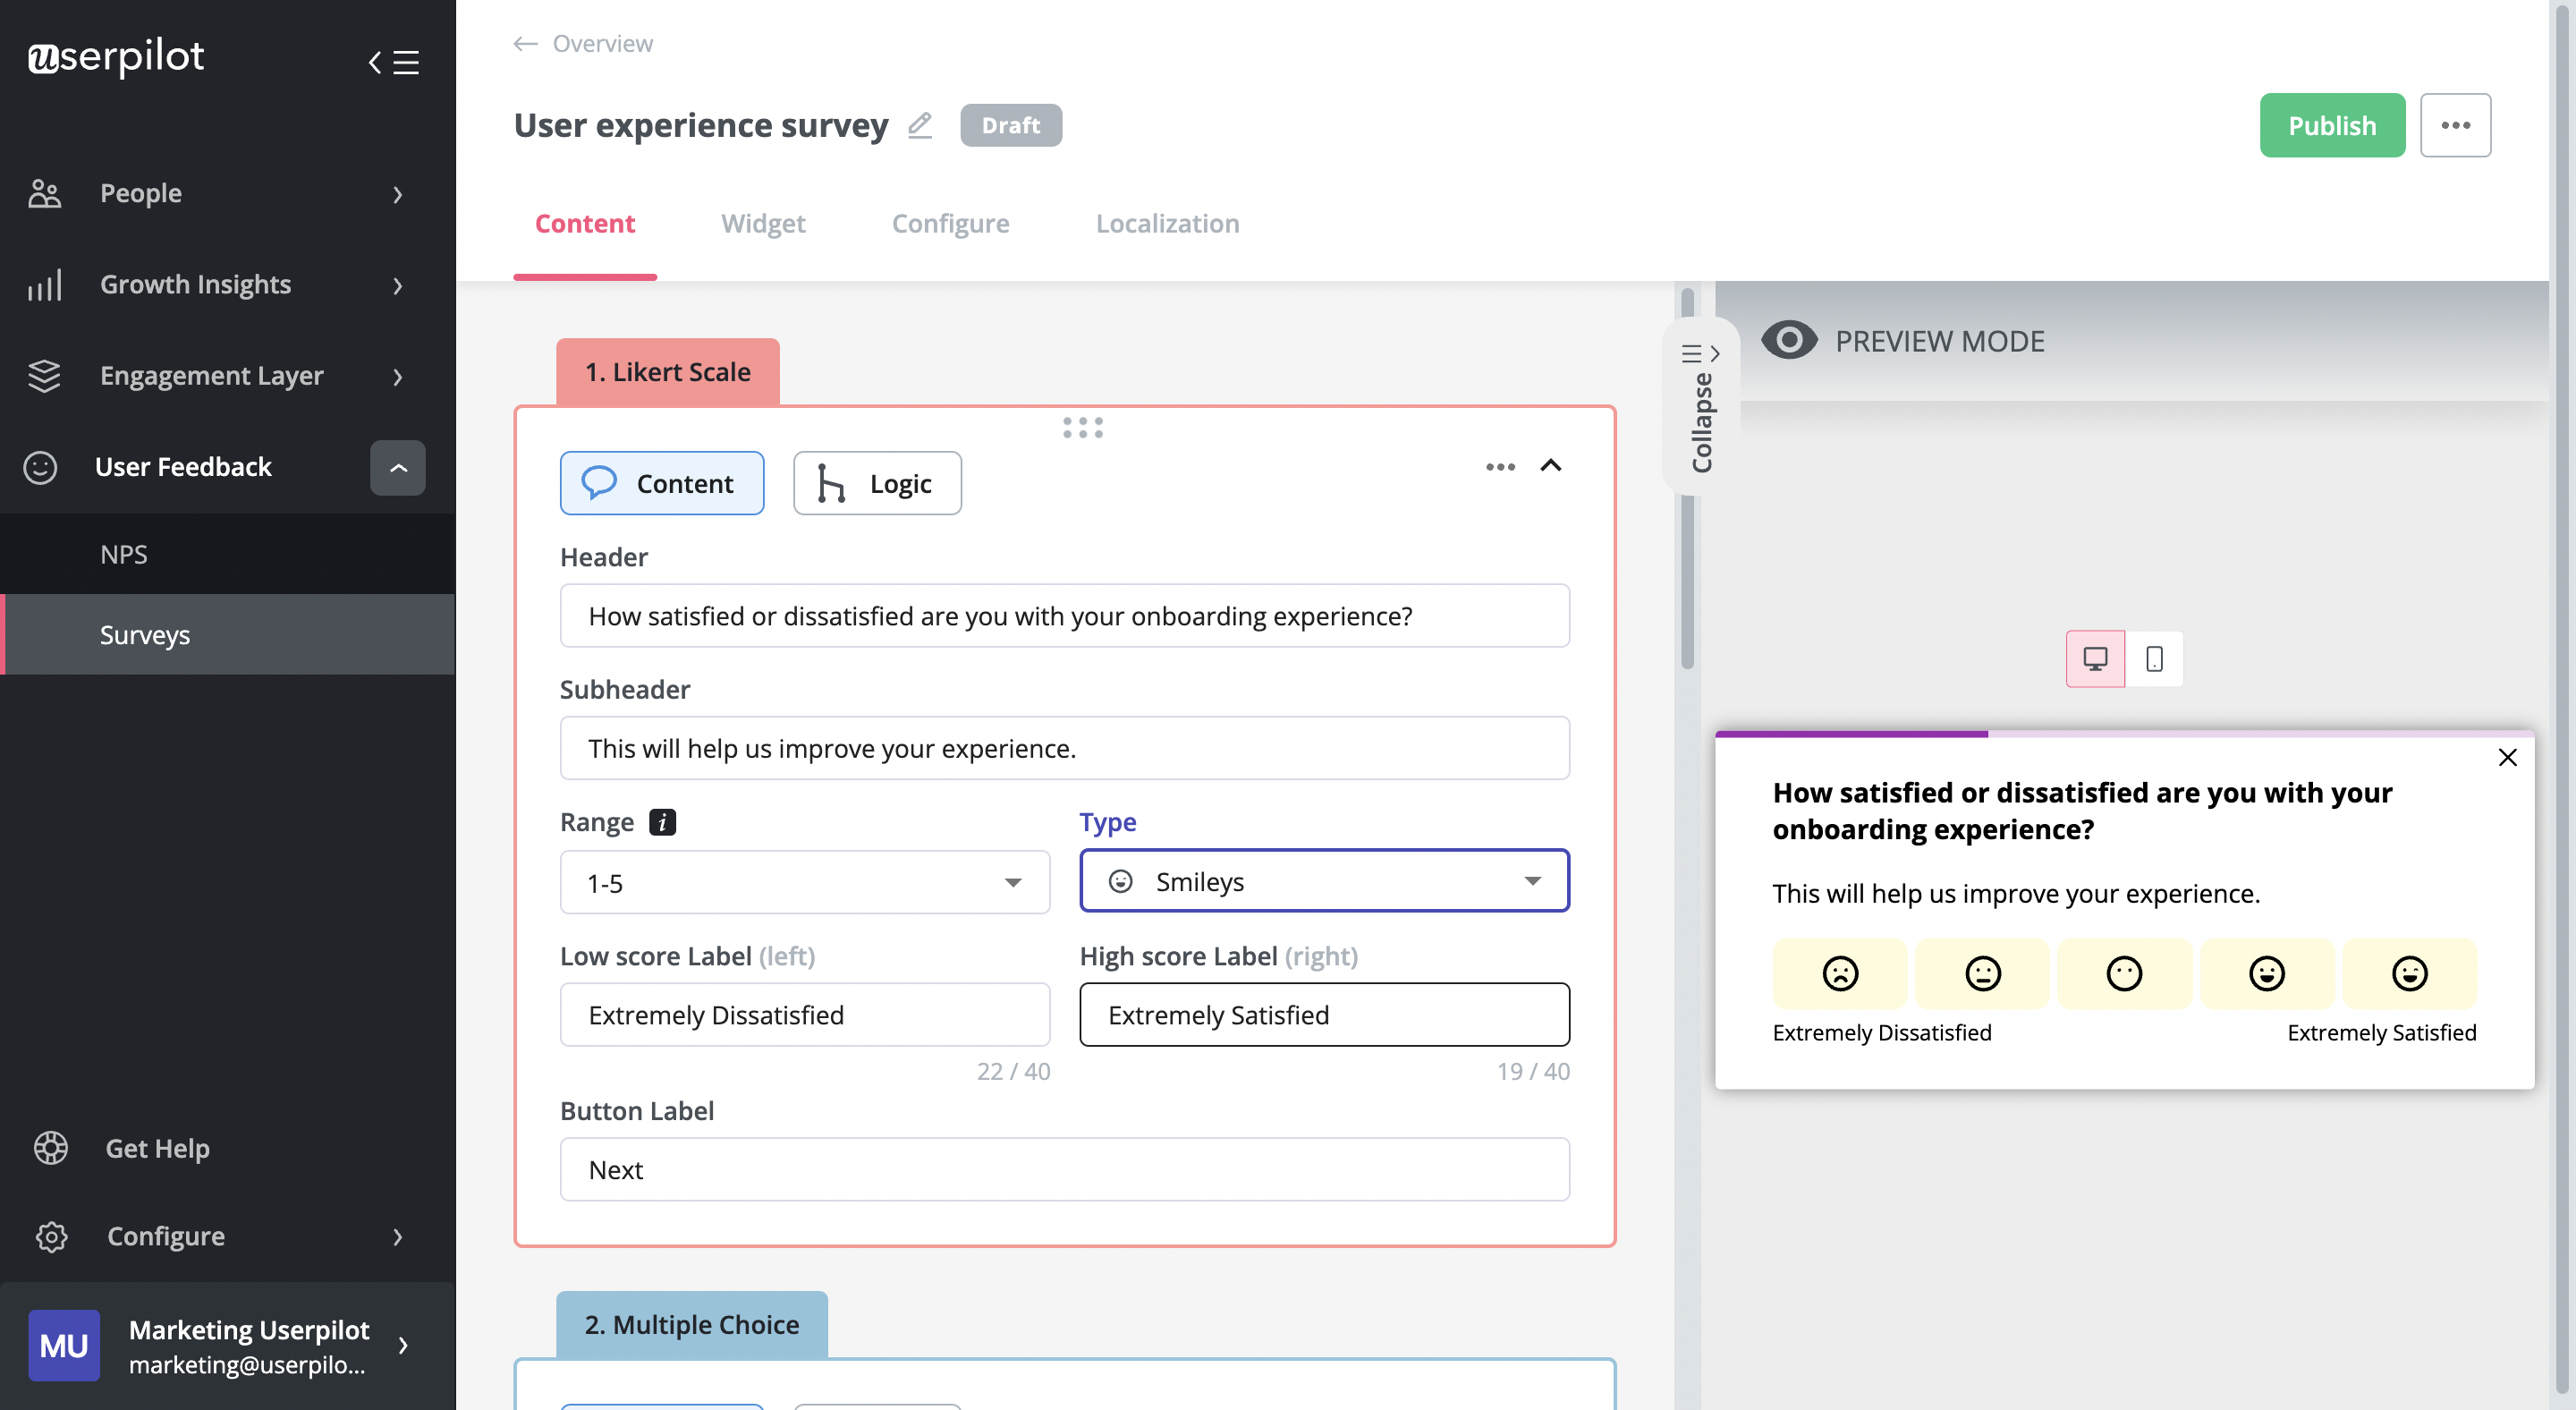 Userpilot onboarding experience with Likert scale question.